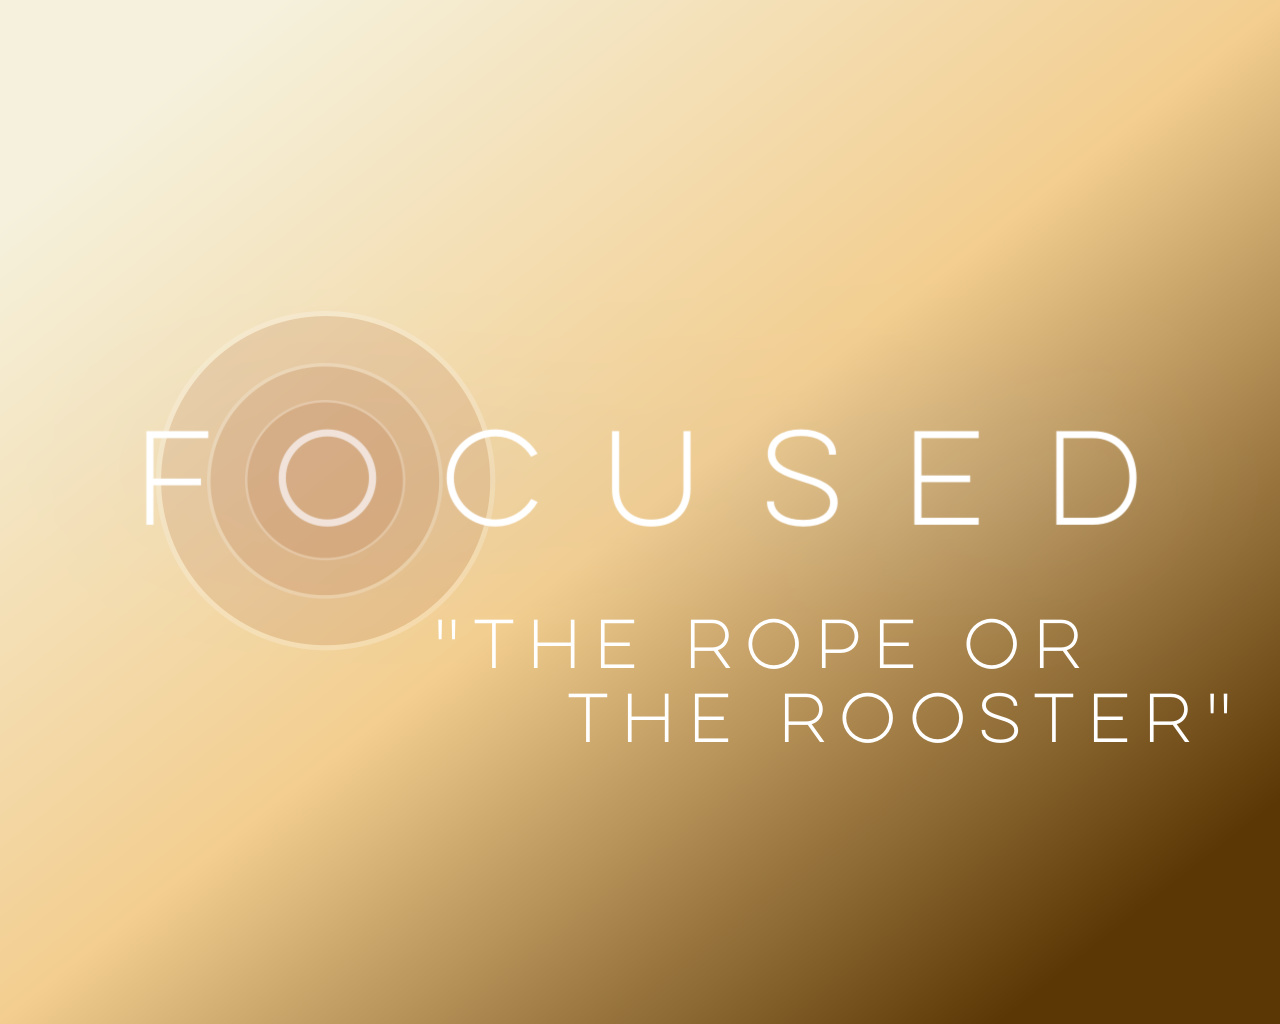 The Rope or The Rooster